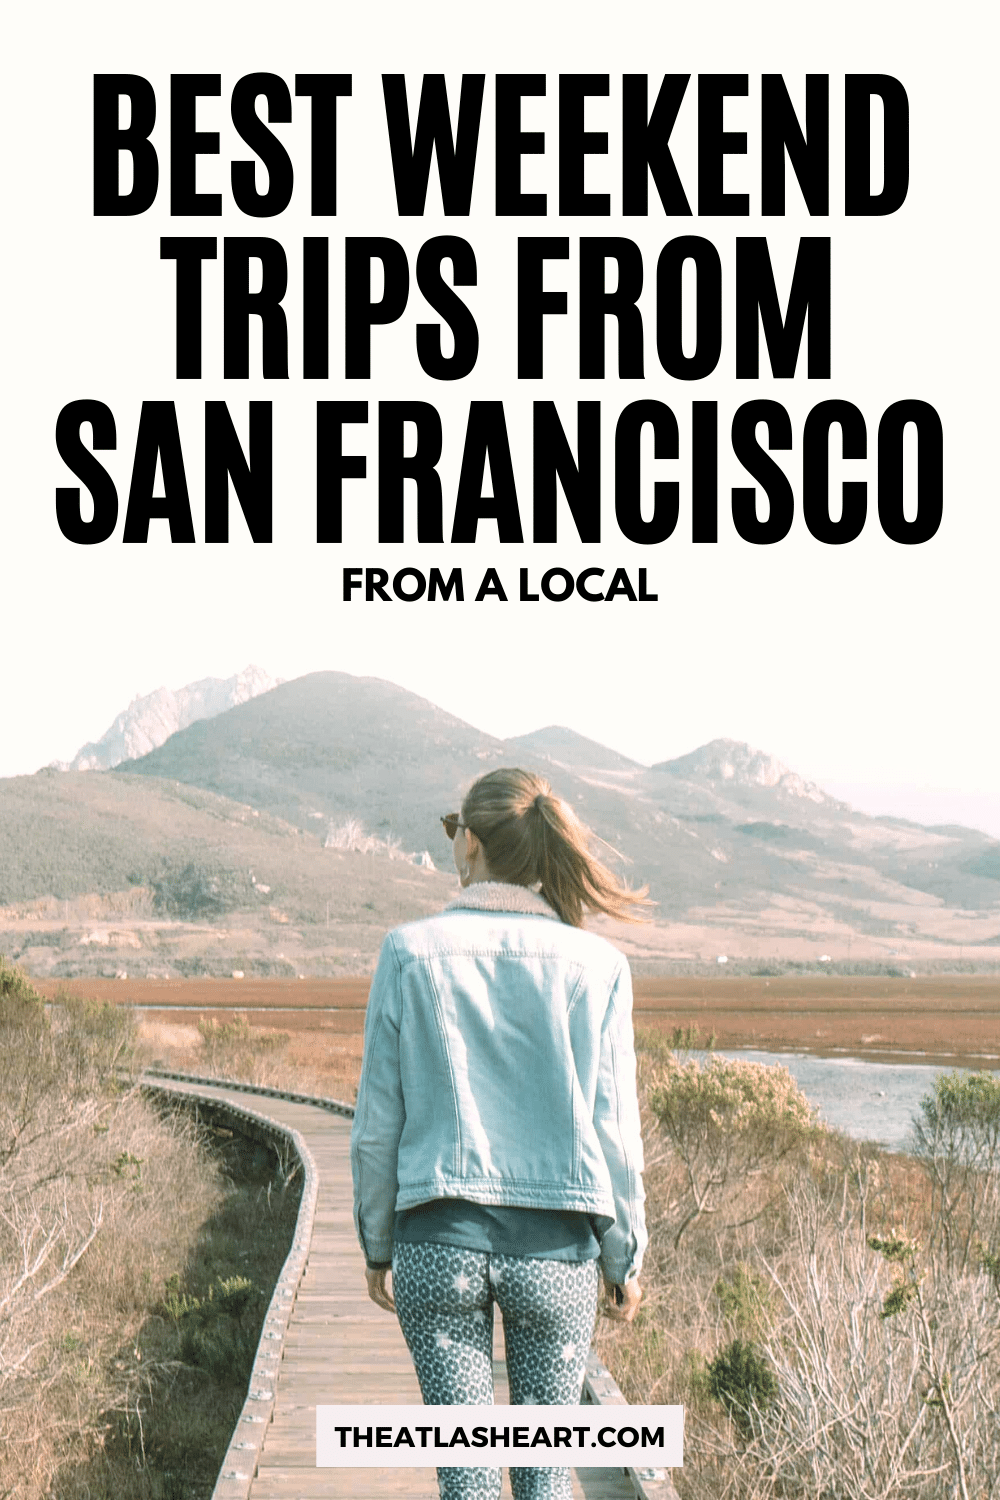 18 Best Weekend Trips From San Francisco (From a Local)